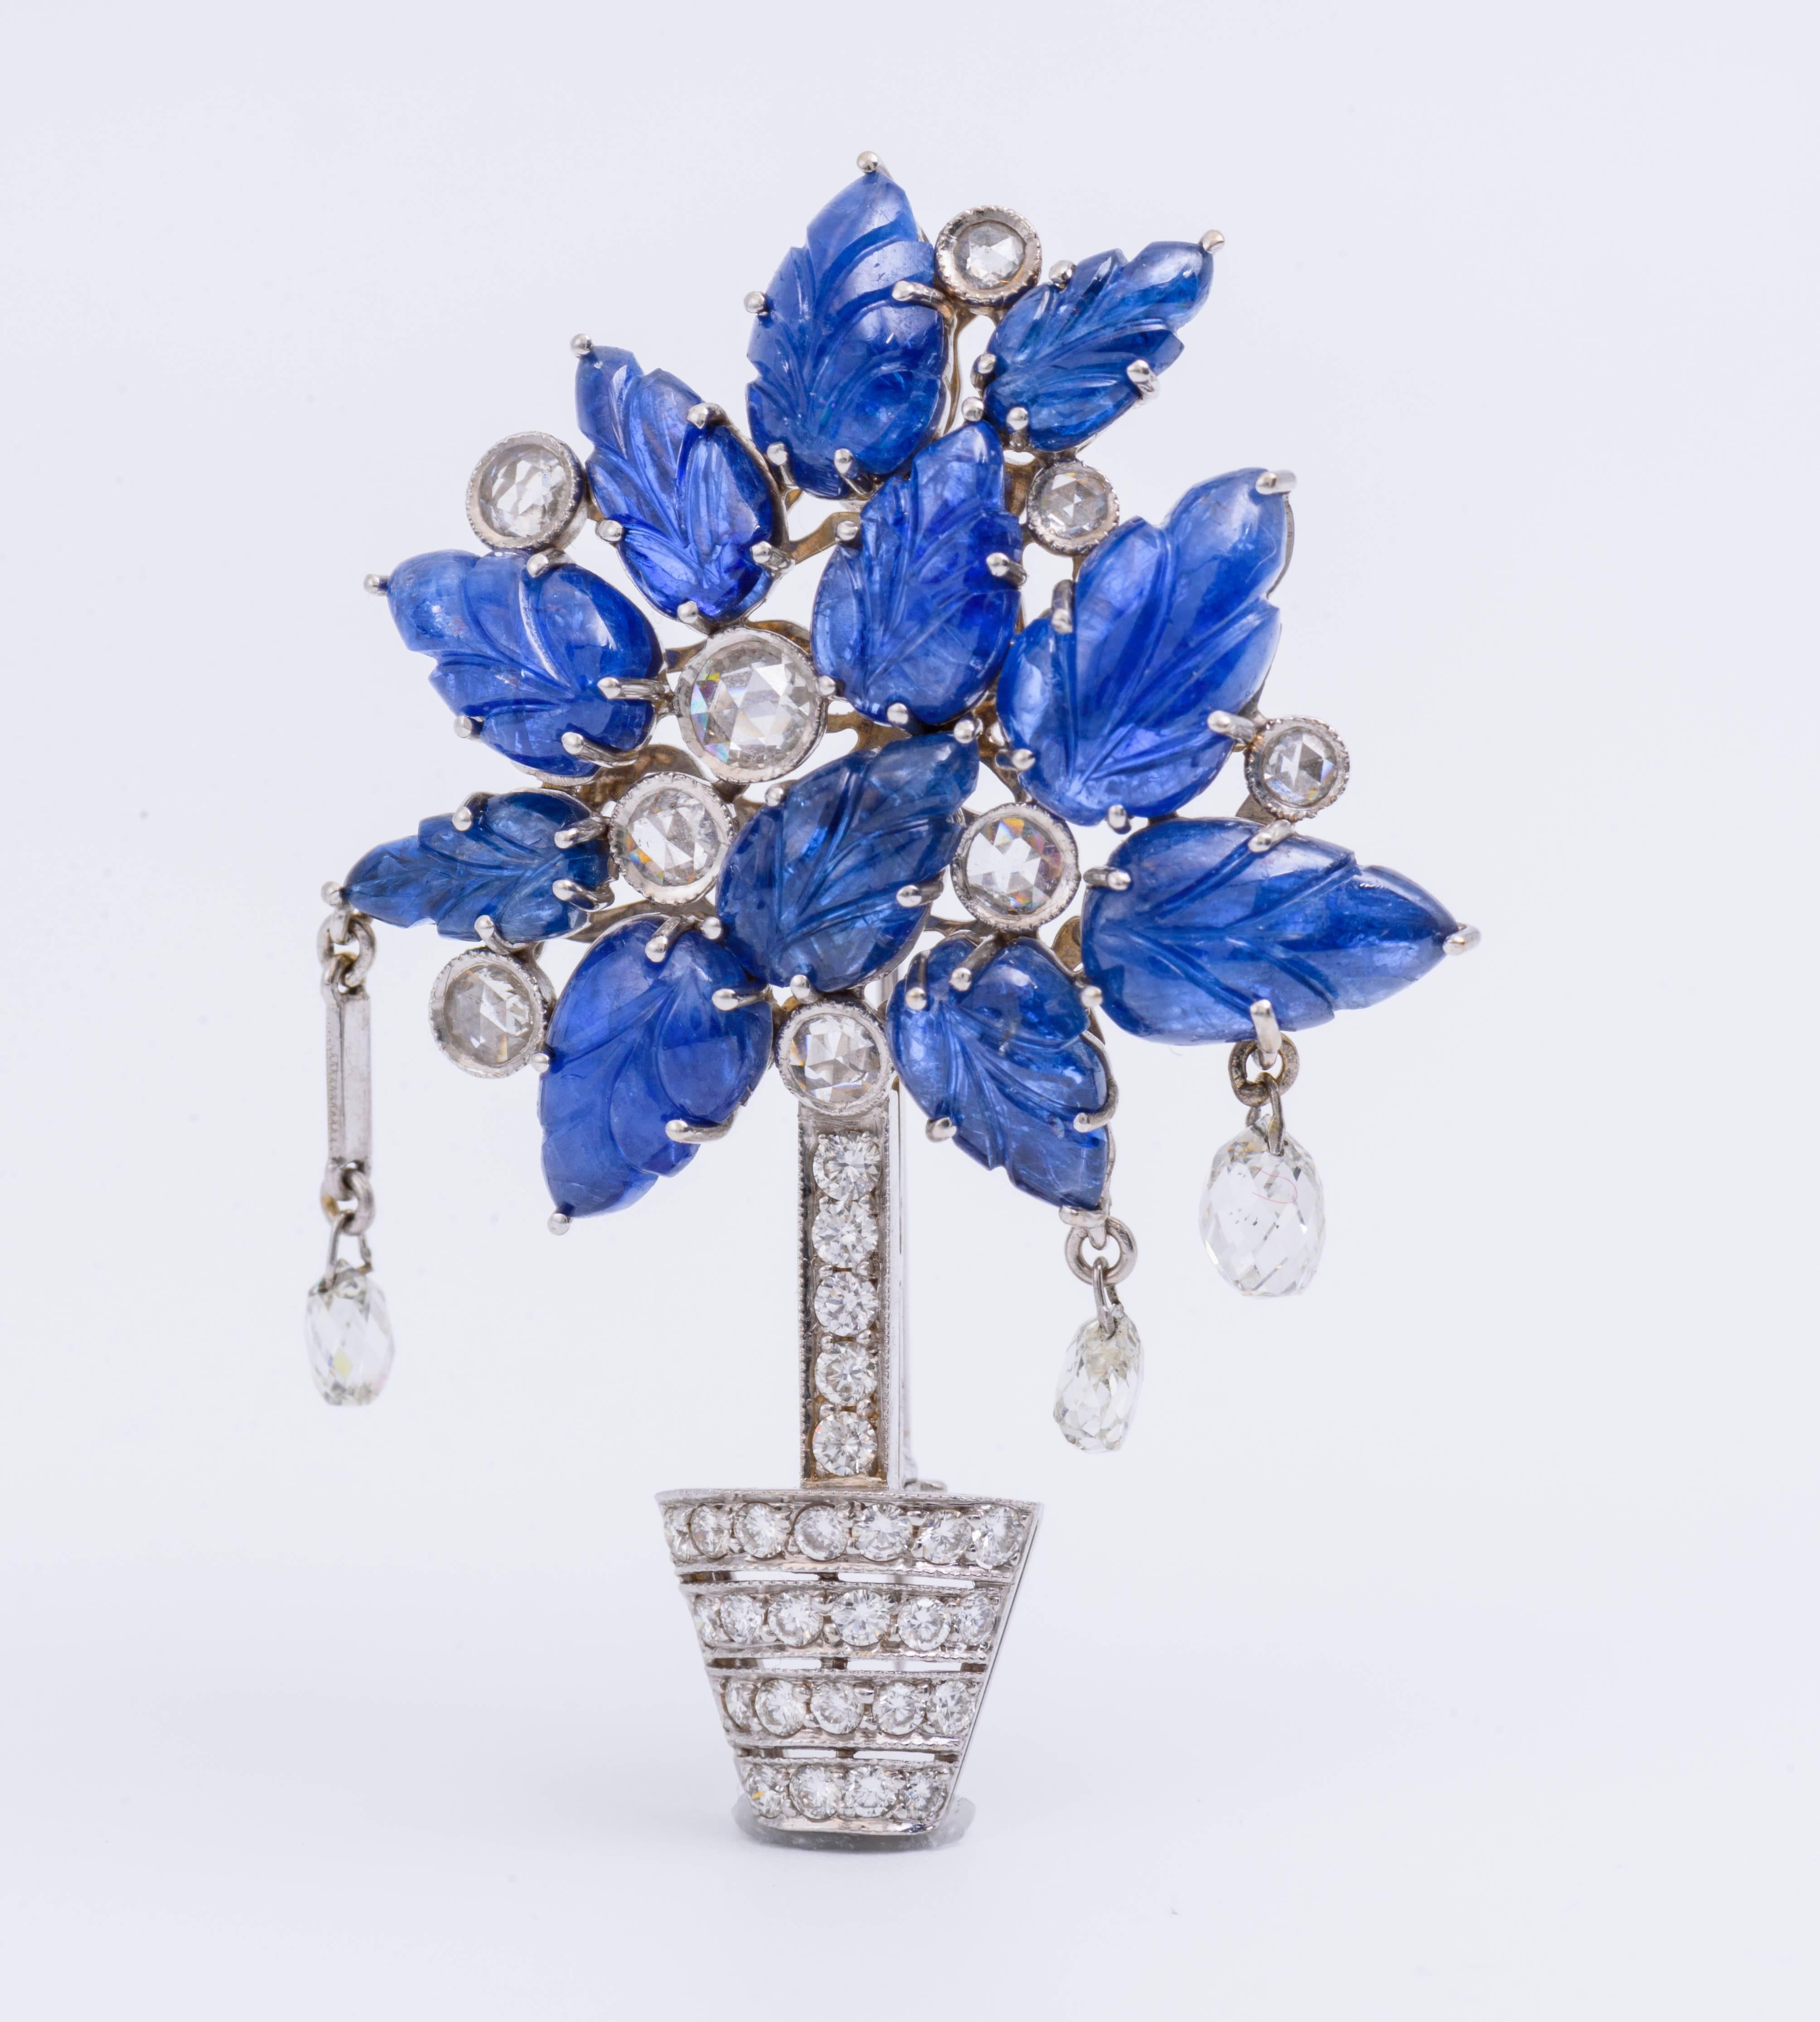 This Blue Sapphire and White Diamond pin is set in 18kt Gold and features 3 hanging Briolette and is 9.4 dwt. The accents on this piece create a beautiful representation of nature.